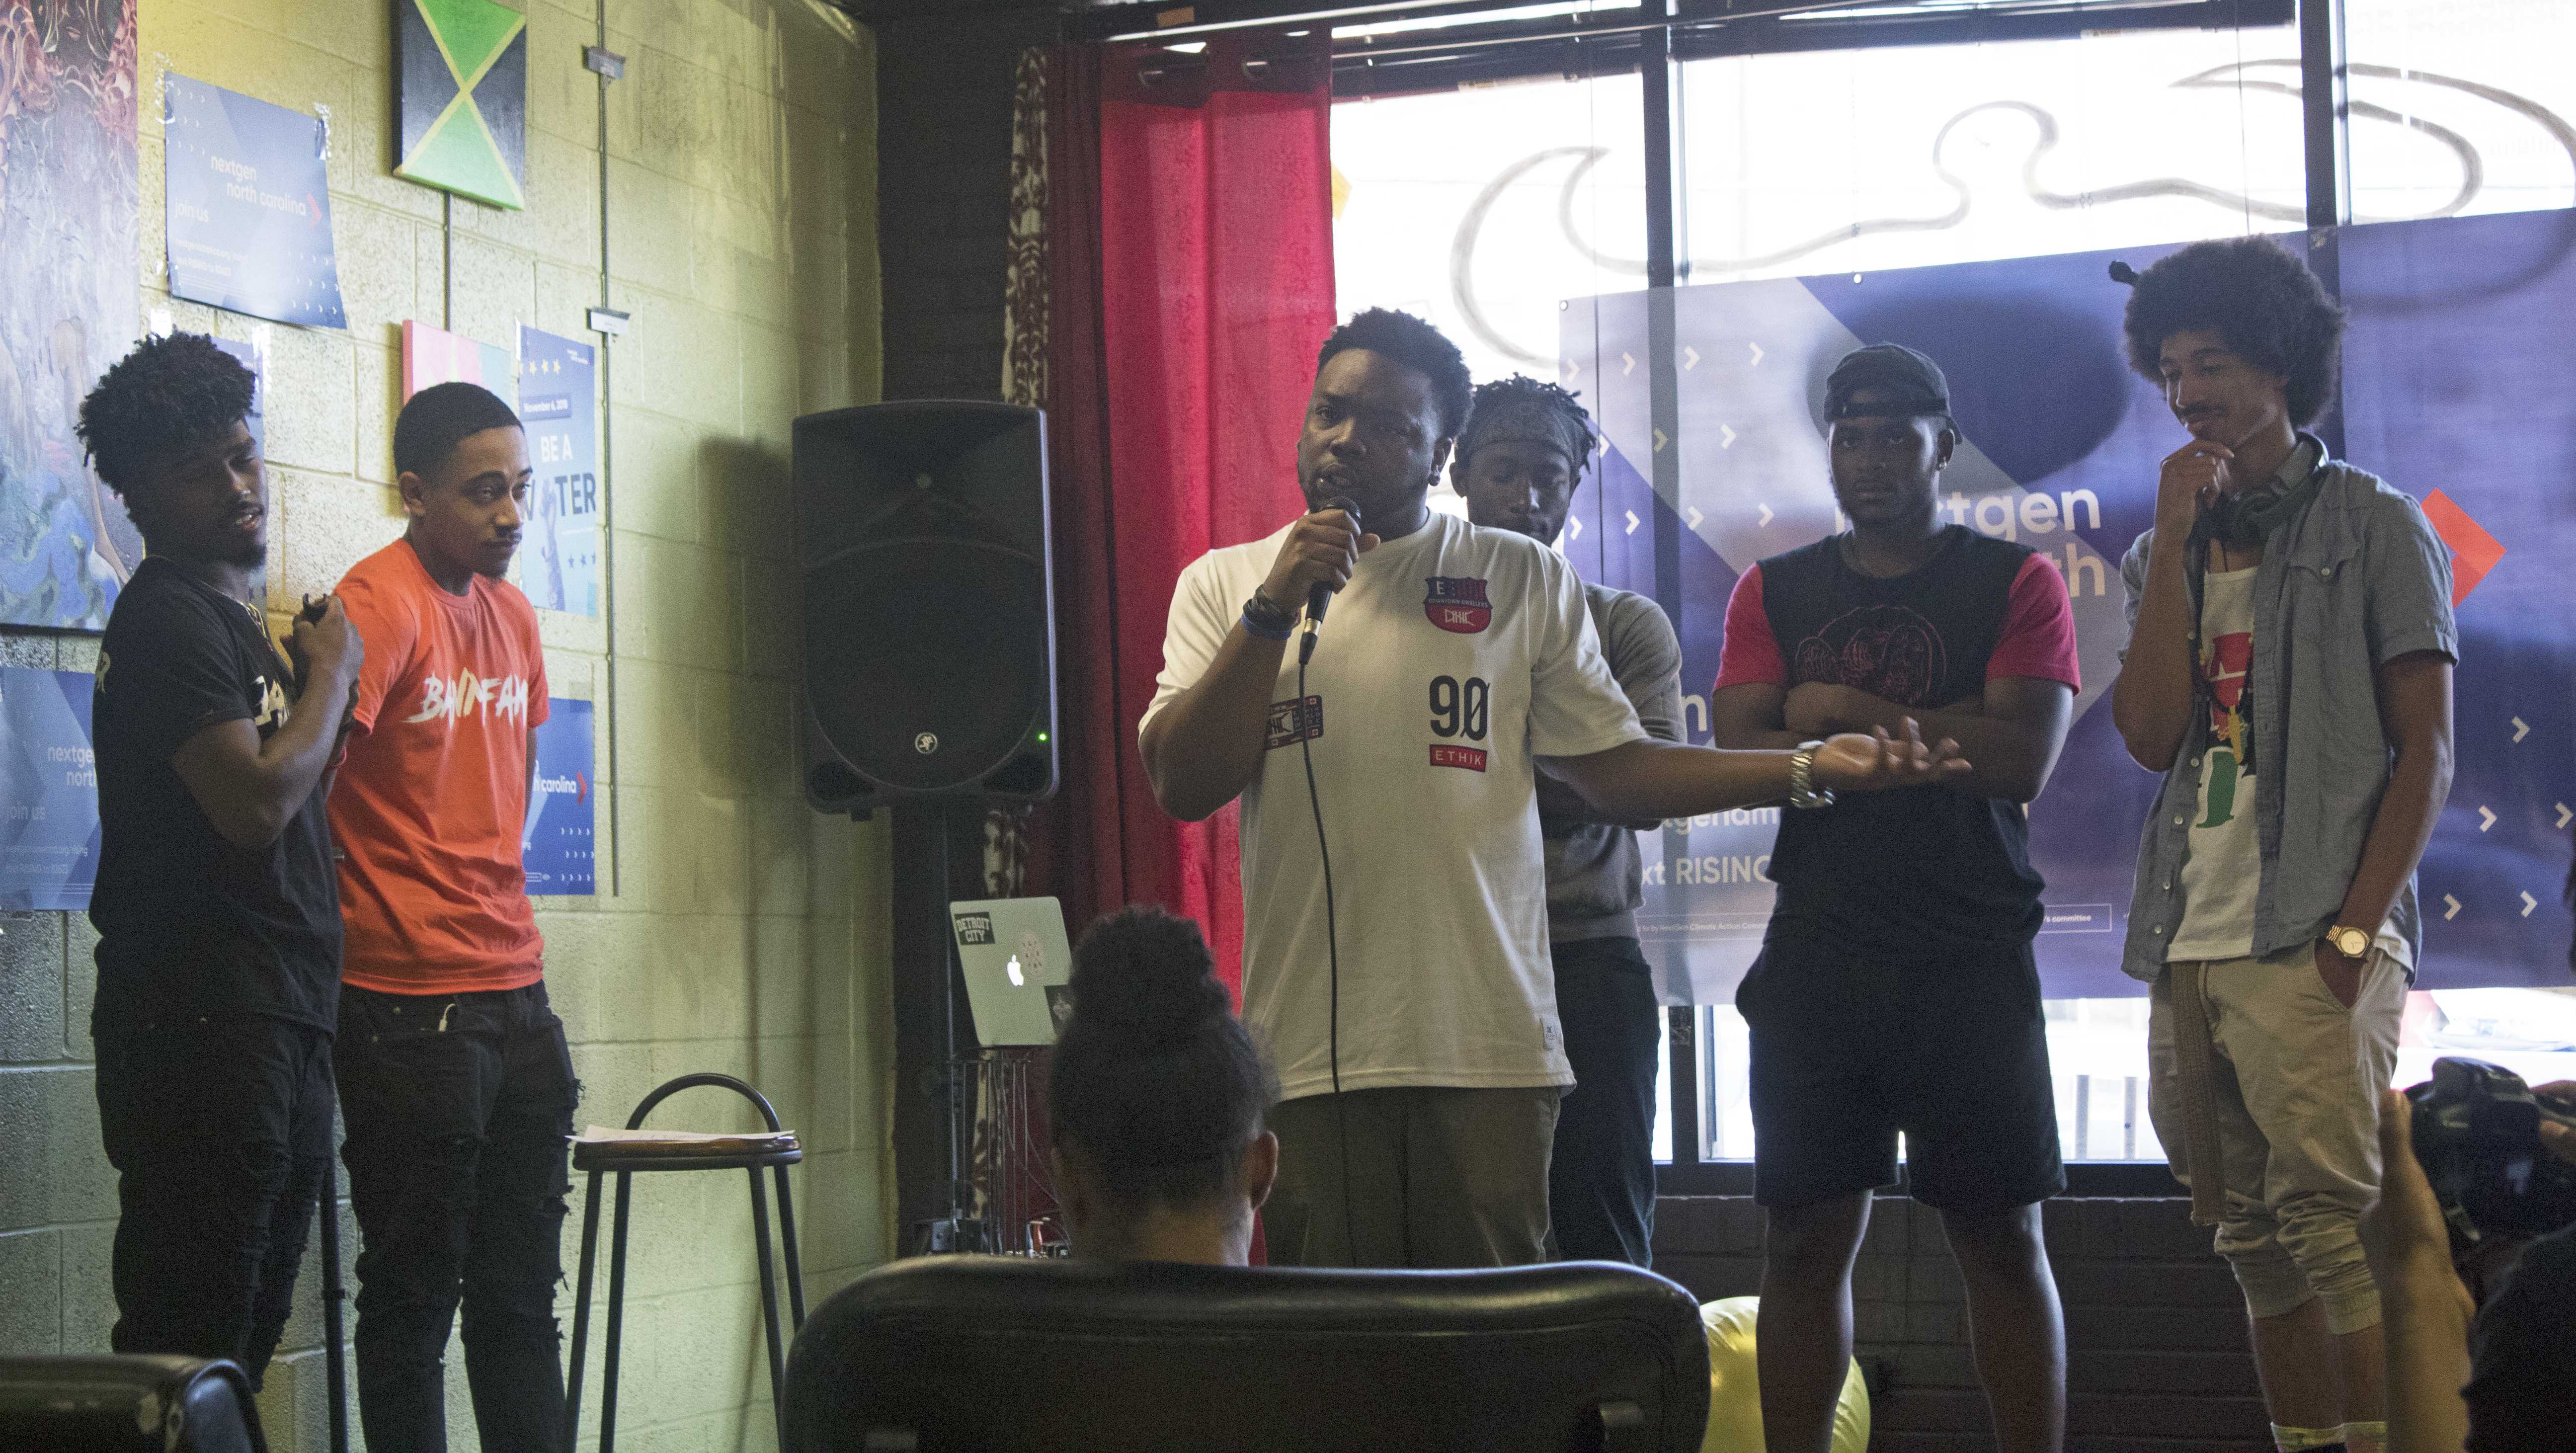 NextGen encourages young voters at the Artist Bloc by Jaylin Saunders